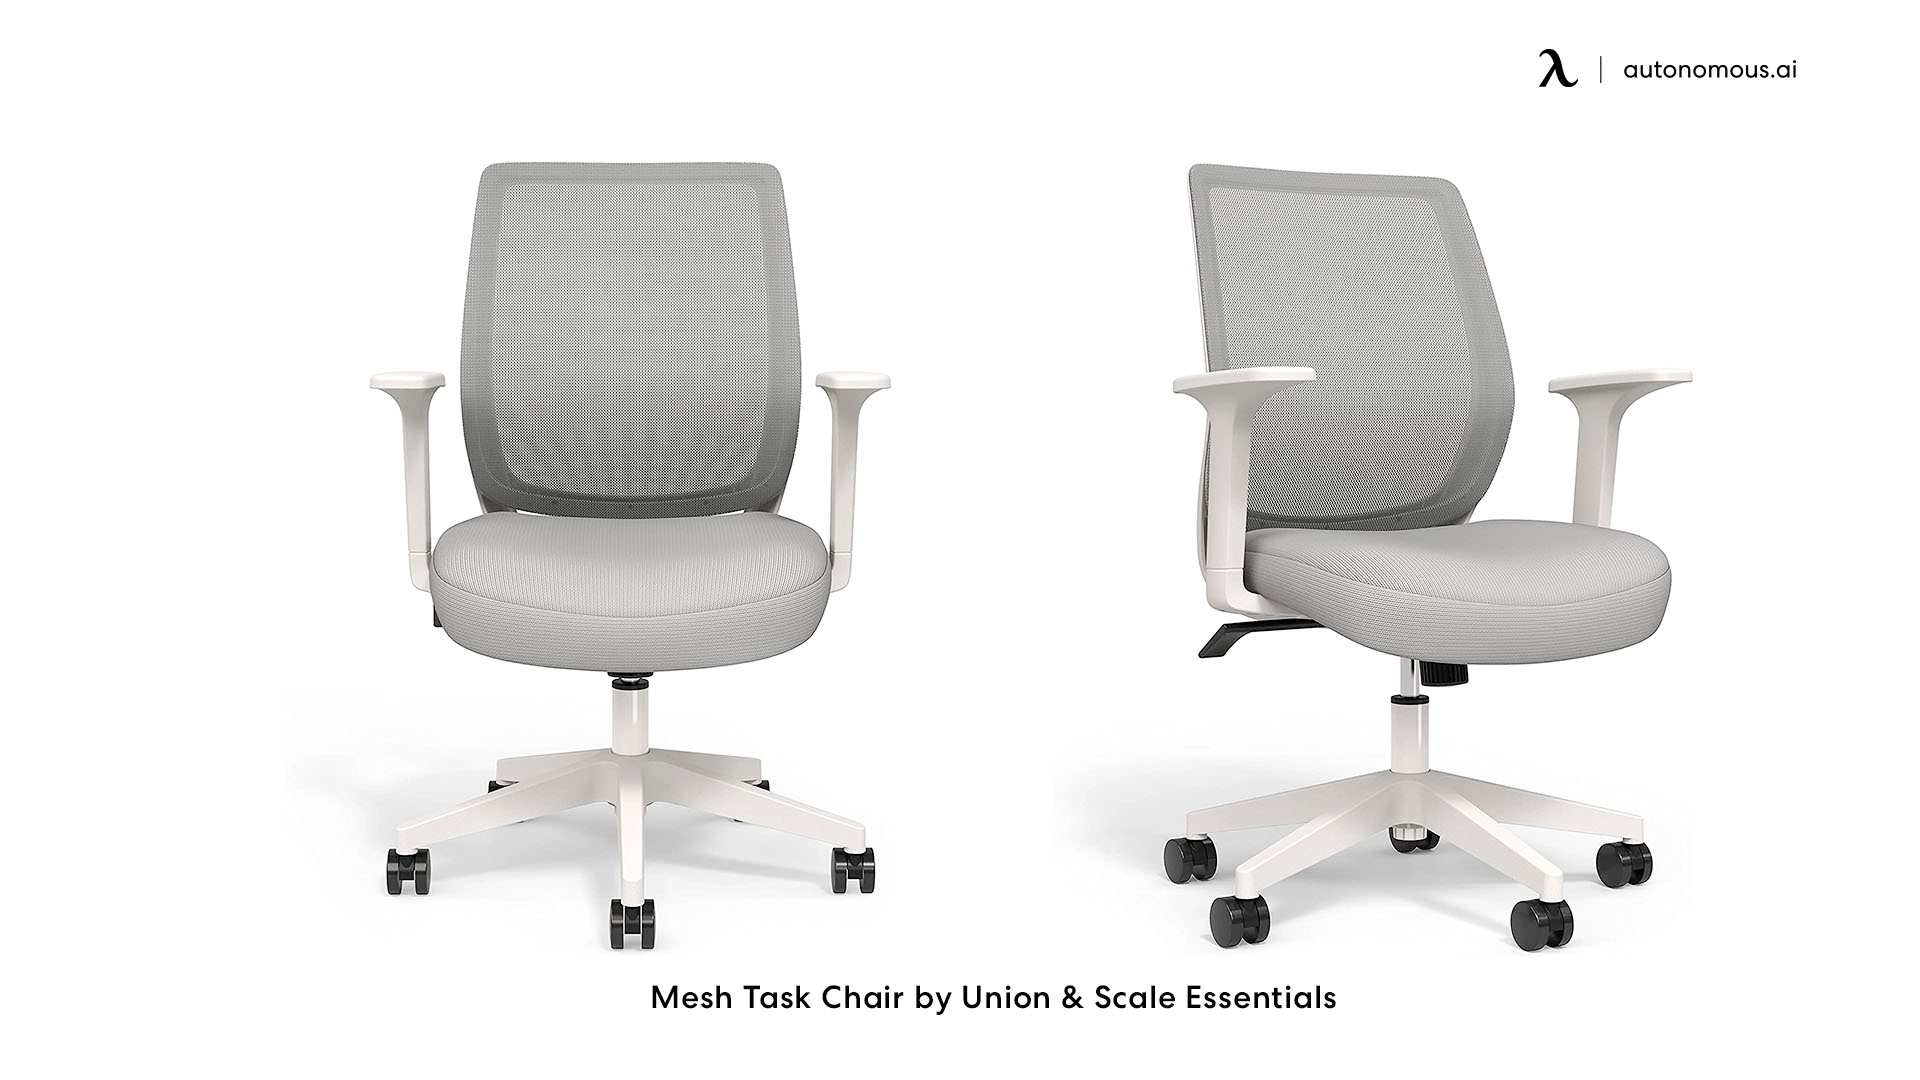 Union & Scale Essentials office chair deals